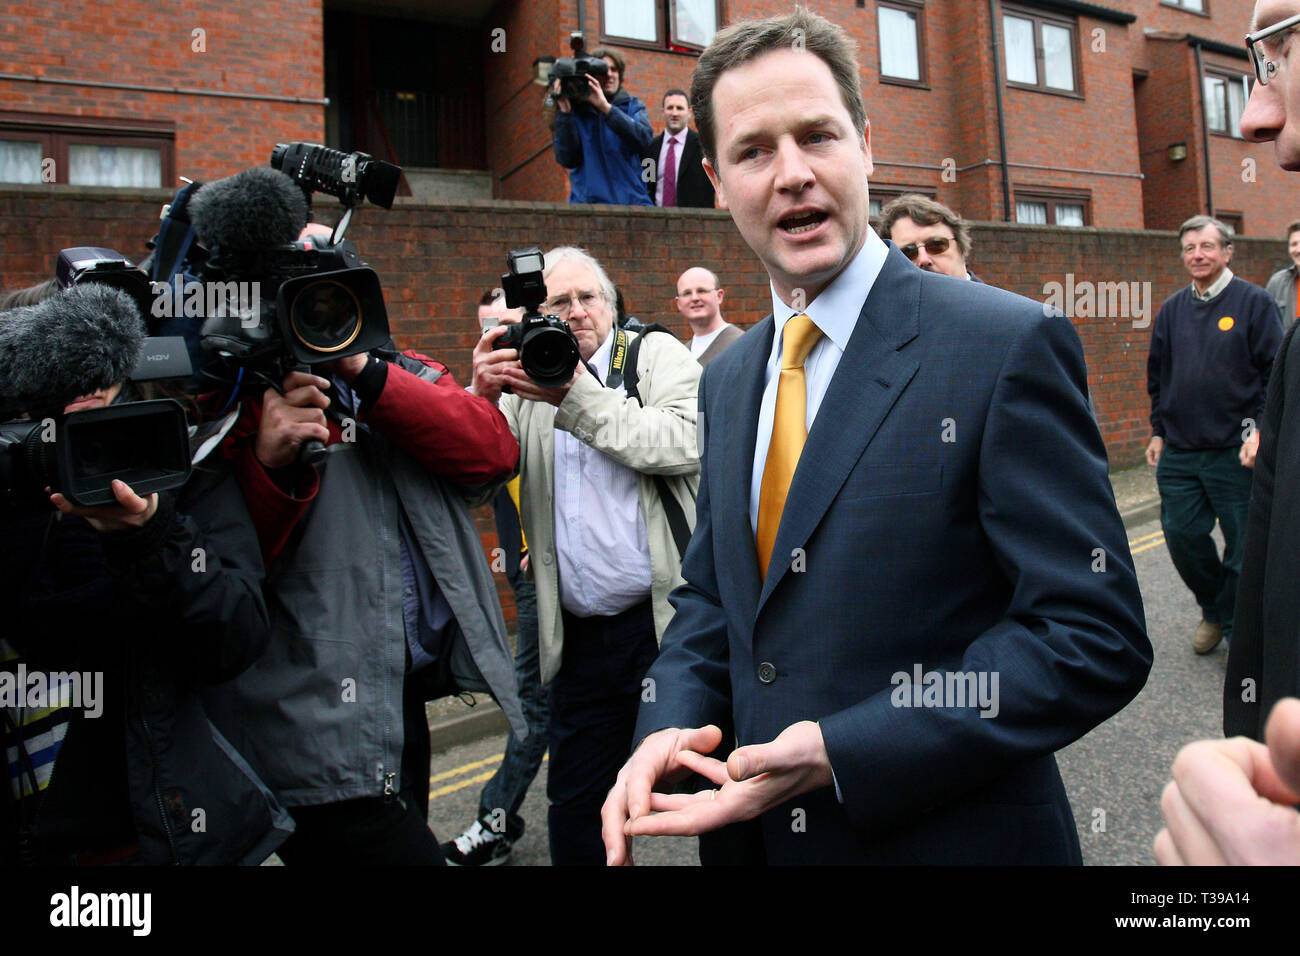 Liberal Democrat leader Nick Clegg arrives. 2010 General Election. Finchley, North London. 5.4.10 Stock Photo